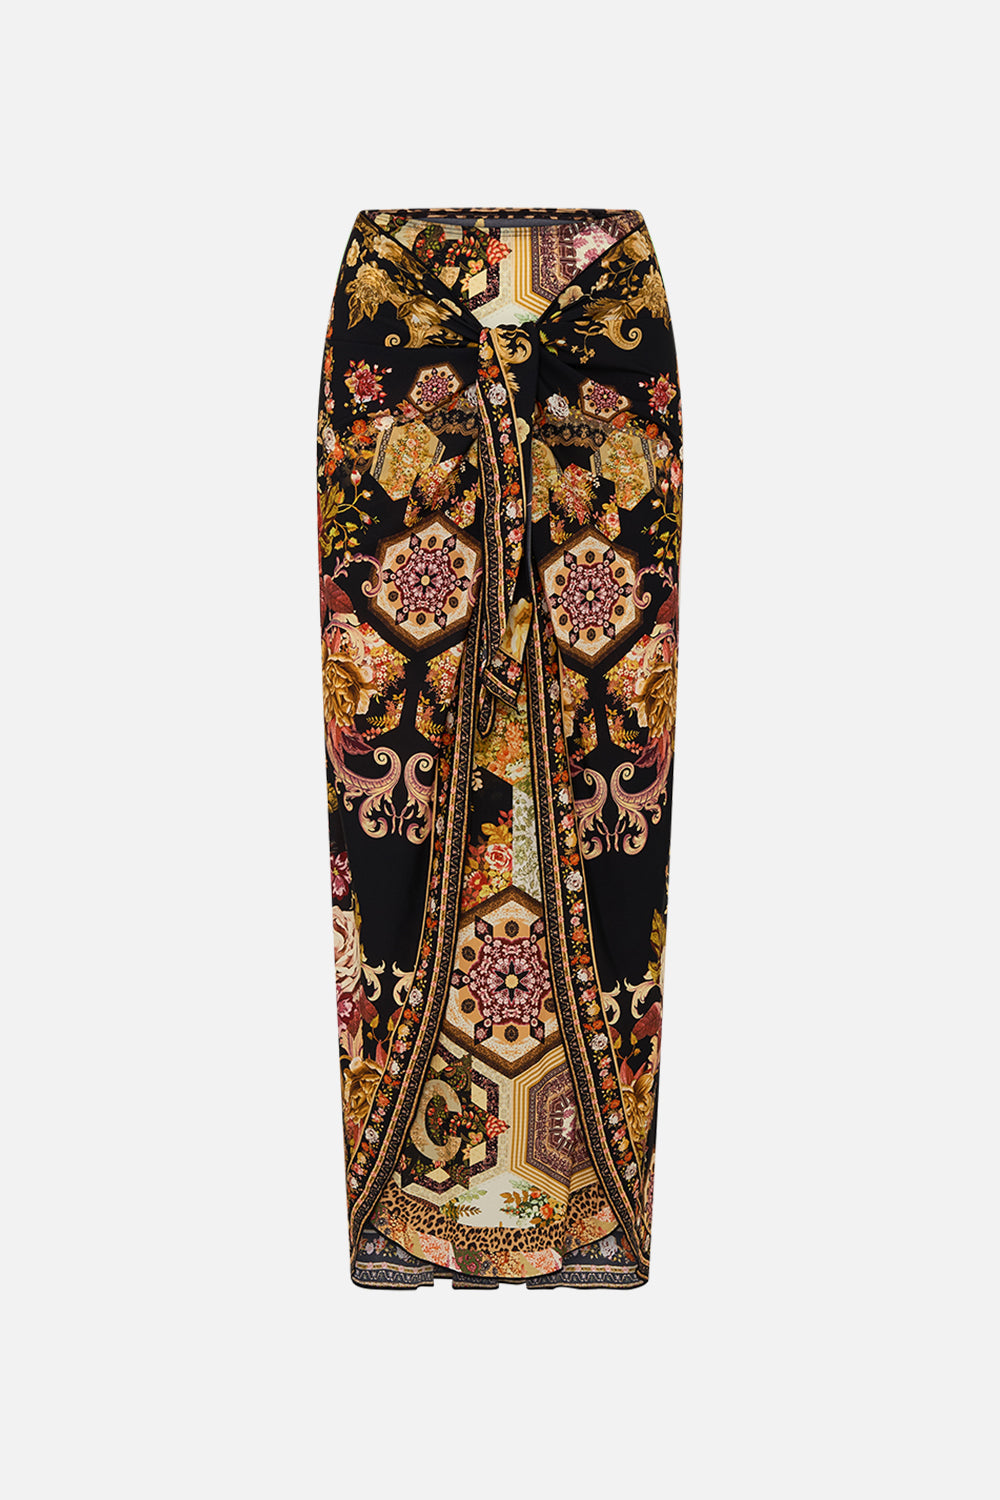 CAMILLA floral layered long sarong with front tie in Stitched in Time